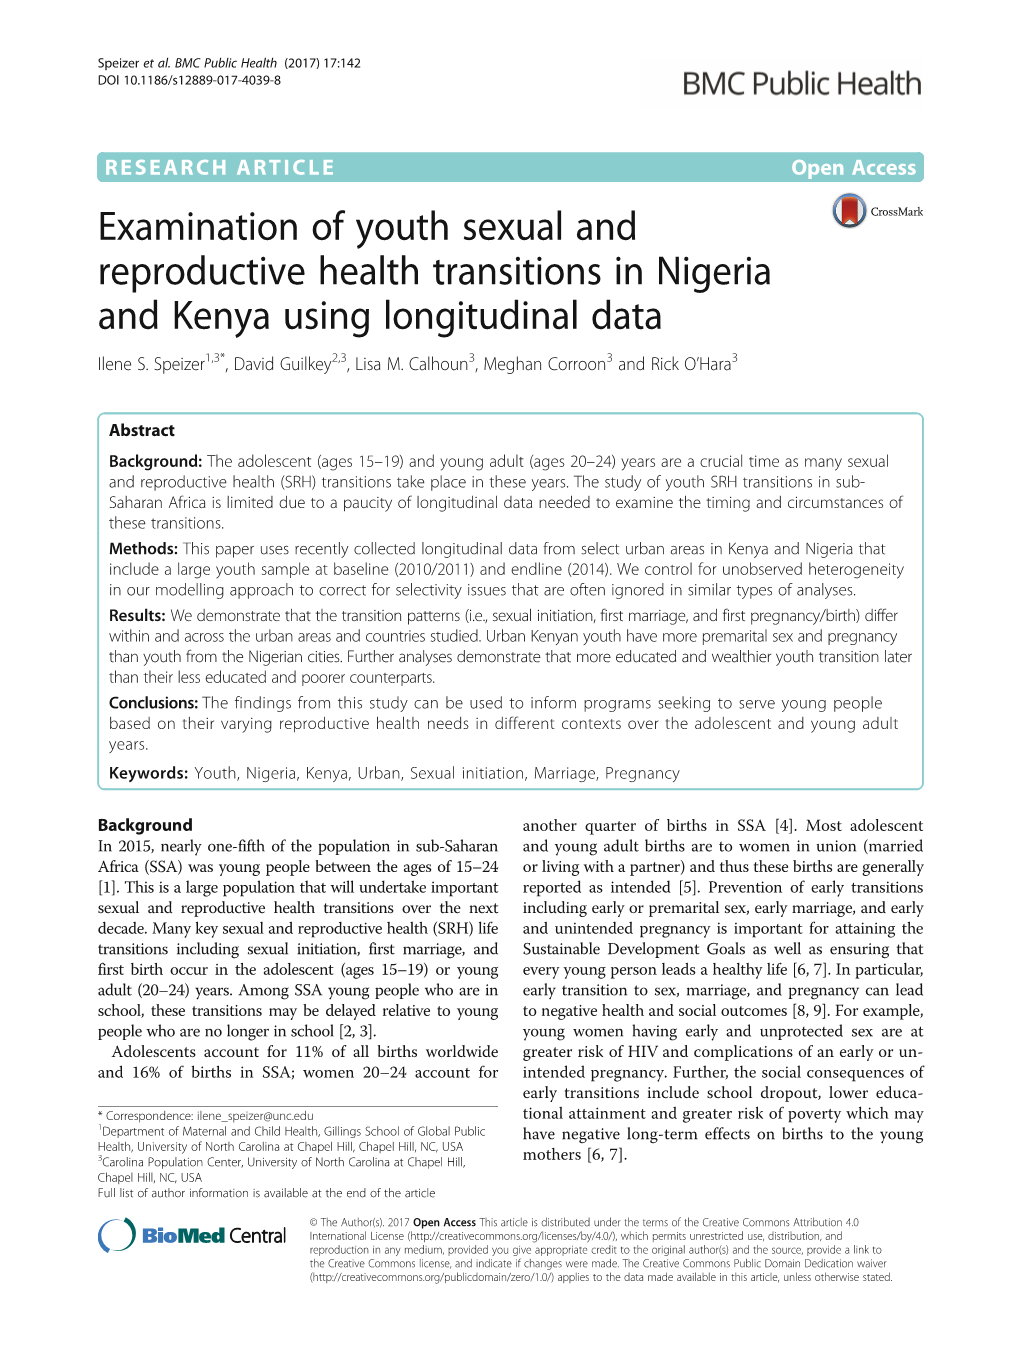 Examination of Youth Sexual and Reproductive Health Transitions in Nigeria and Kenya Using Longitudinal Data Ilene S